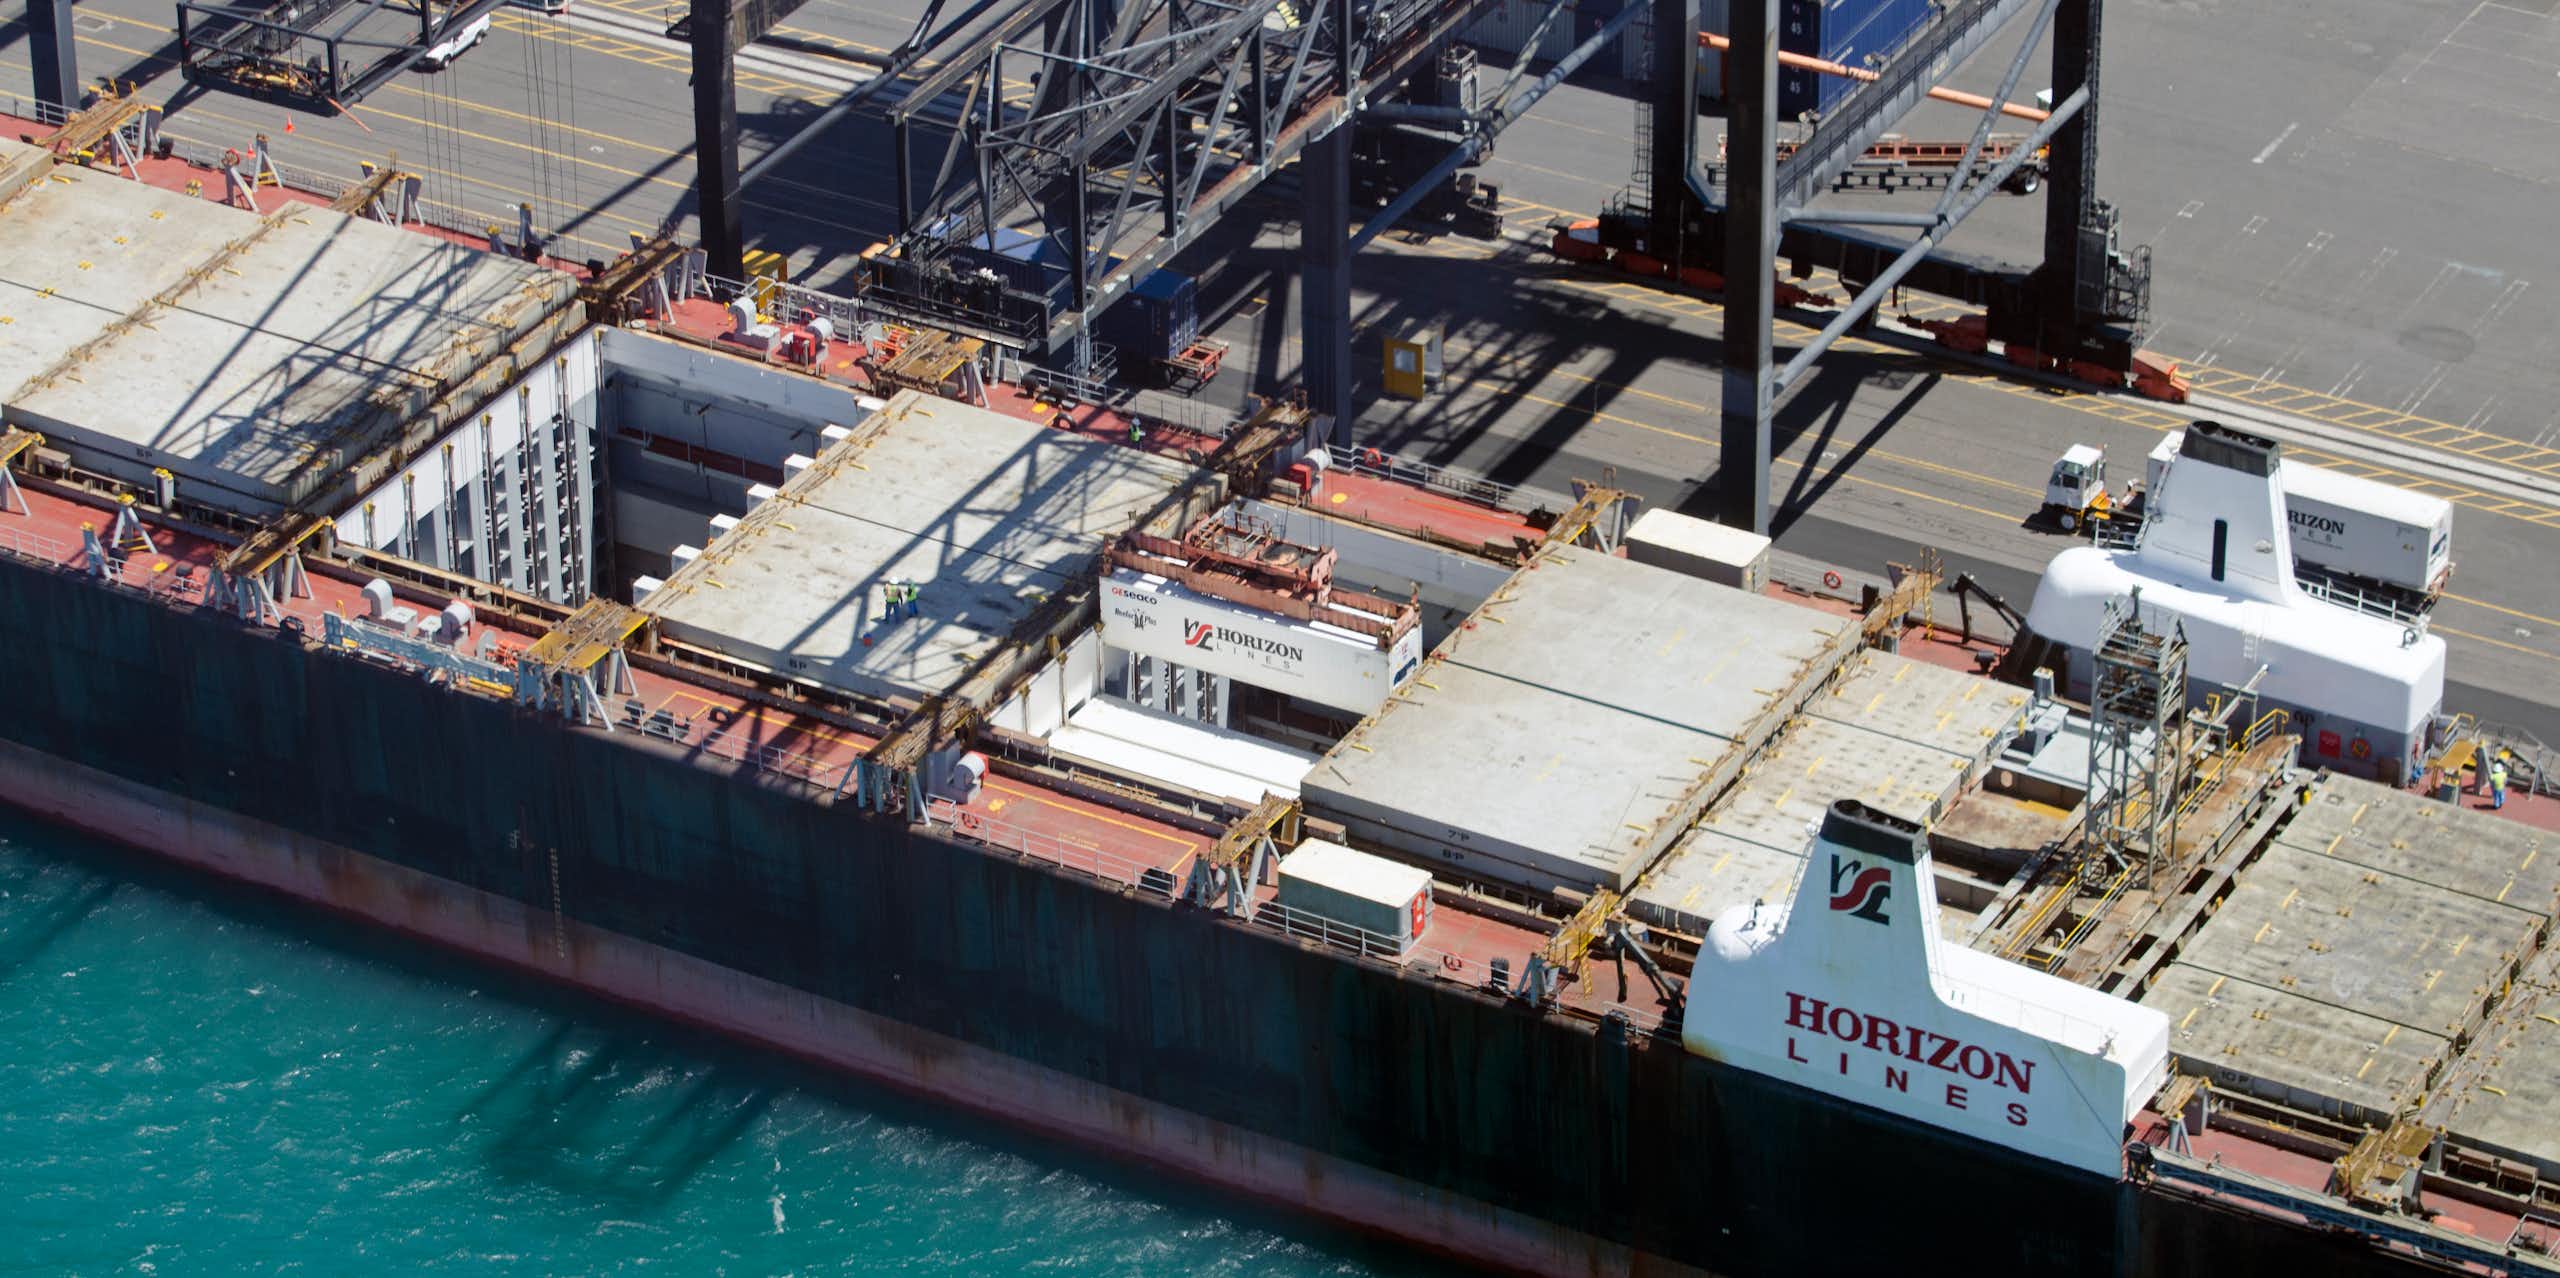 Gantry cranes are seen loading containers into the hold of a cargo ship in Honolulu, Hawaii.